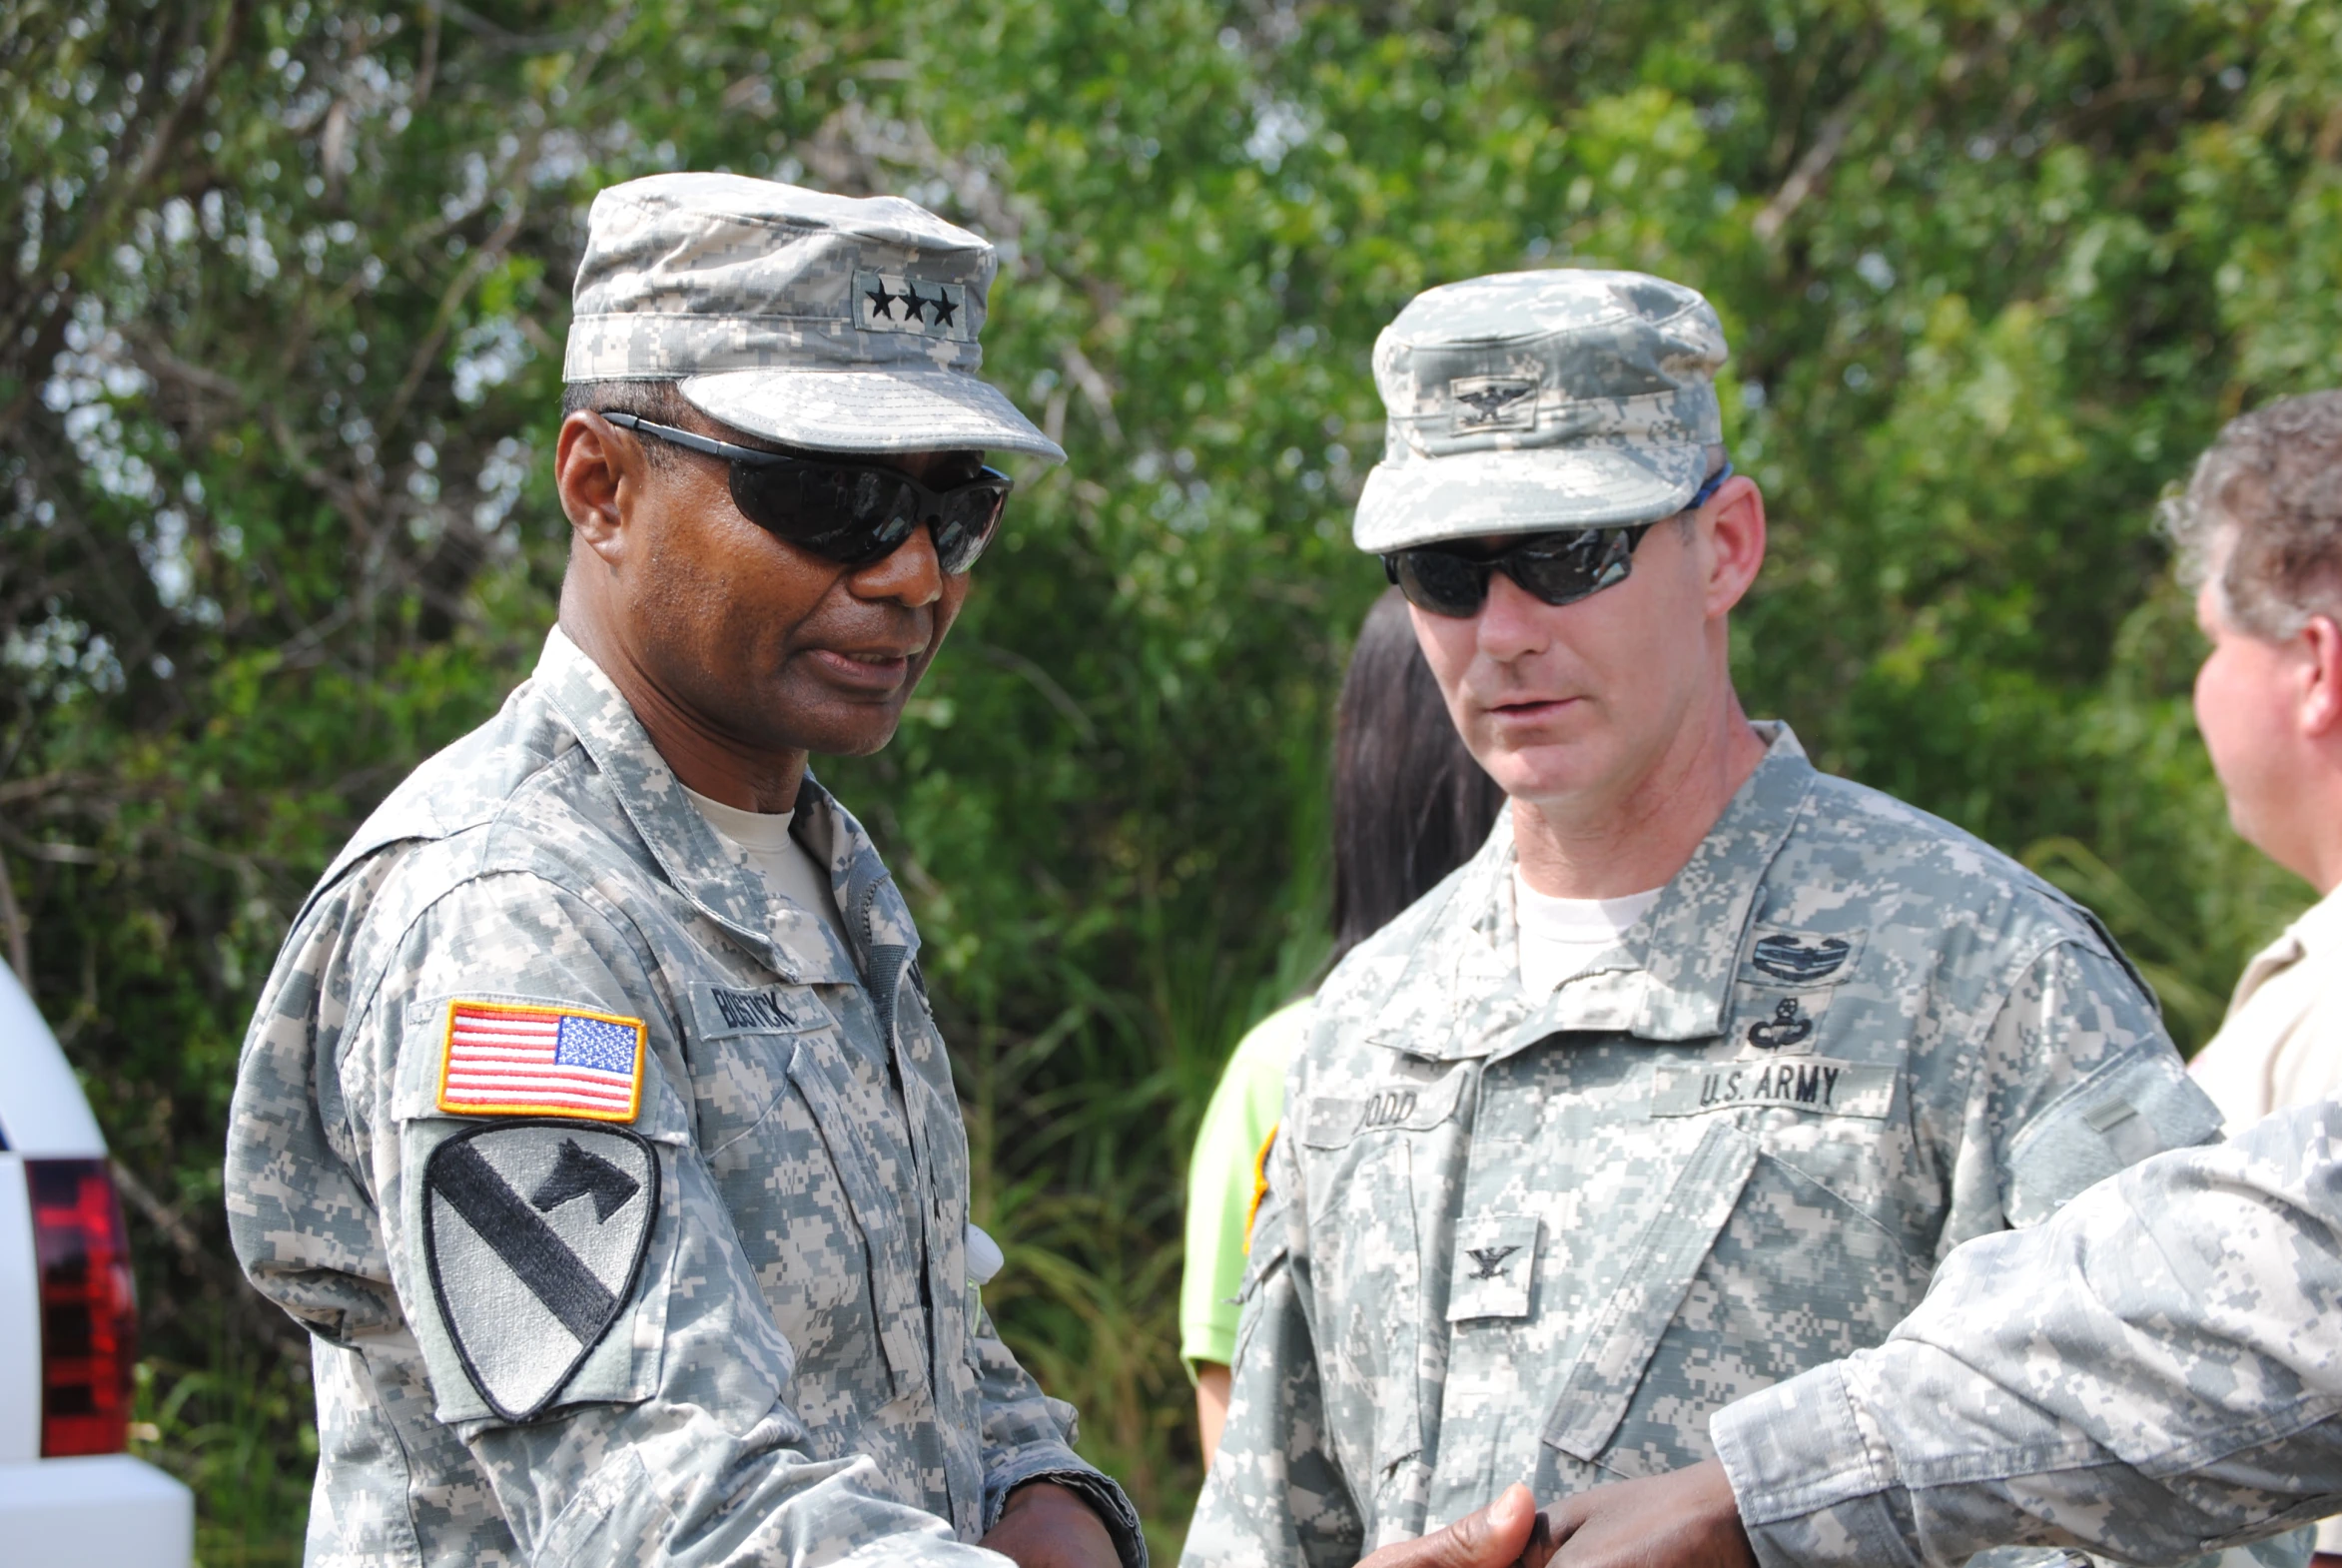 two men in uniform stand together with other people